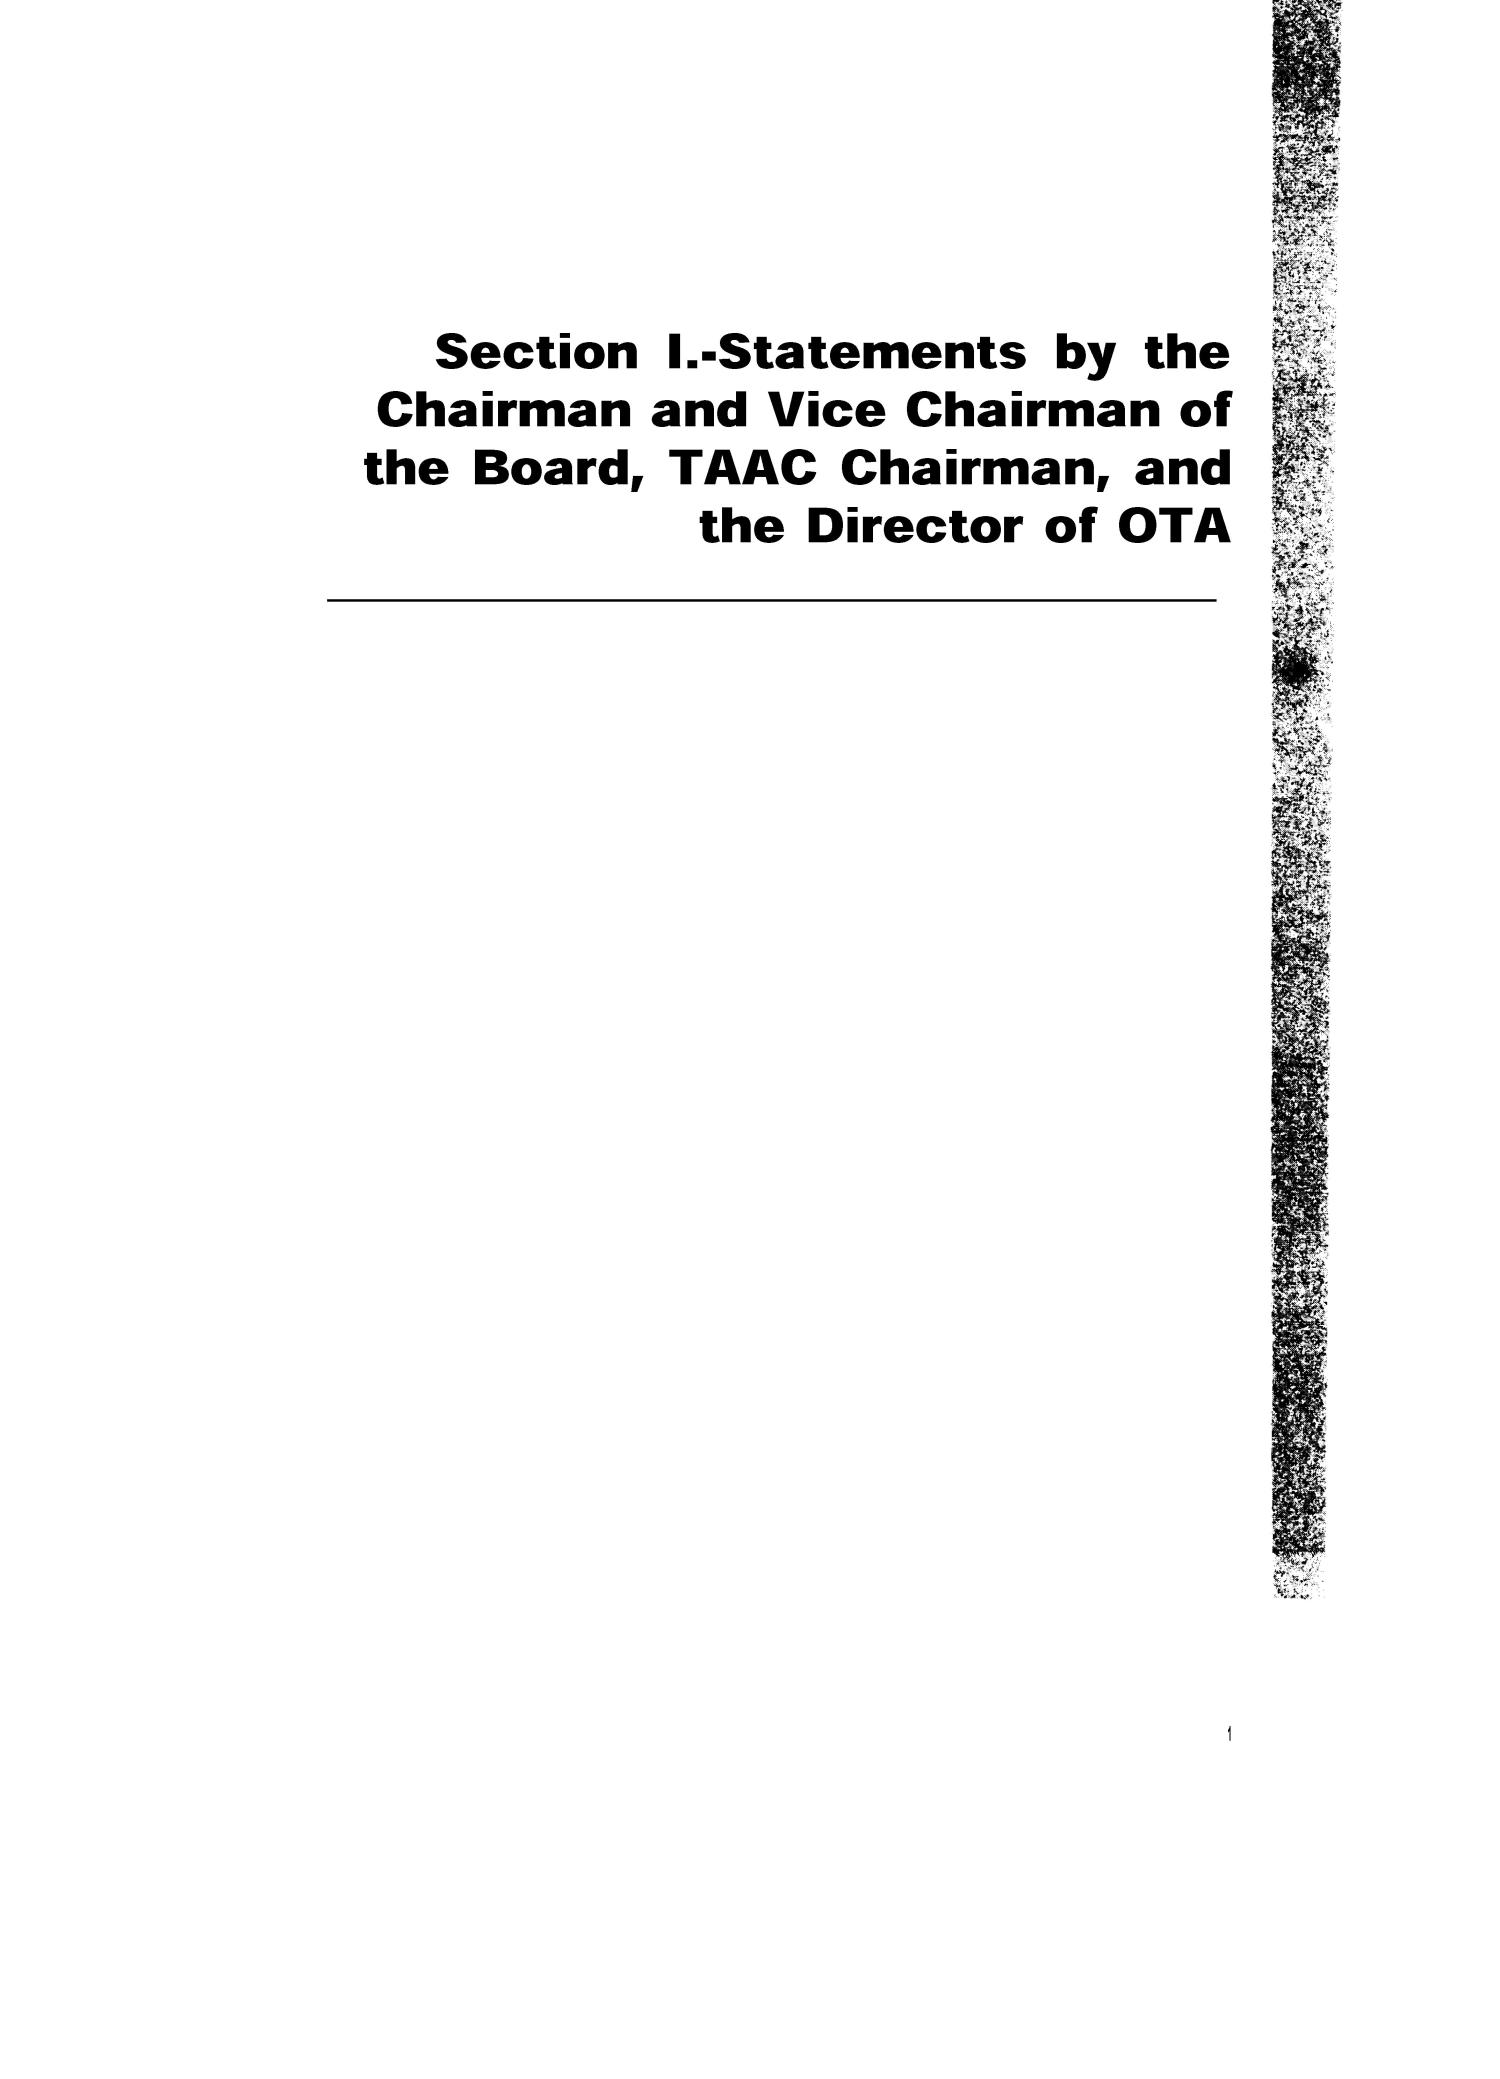 Annual Report to the Congress for 1982
                                                
                                                    1
                                                